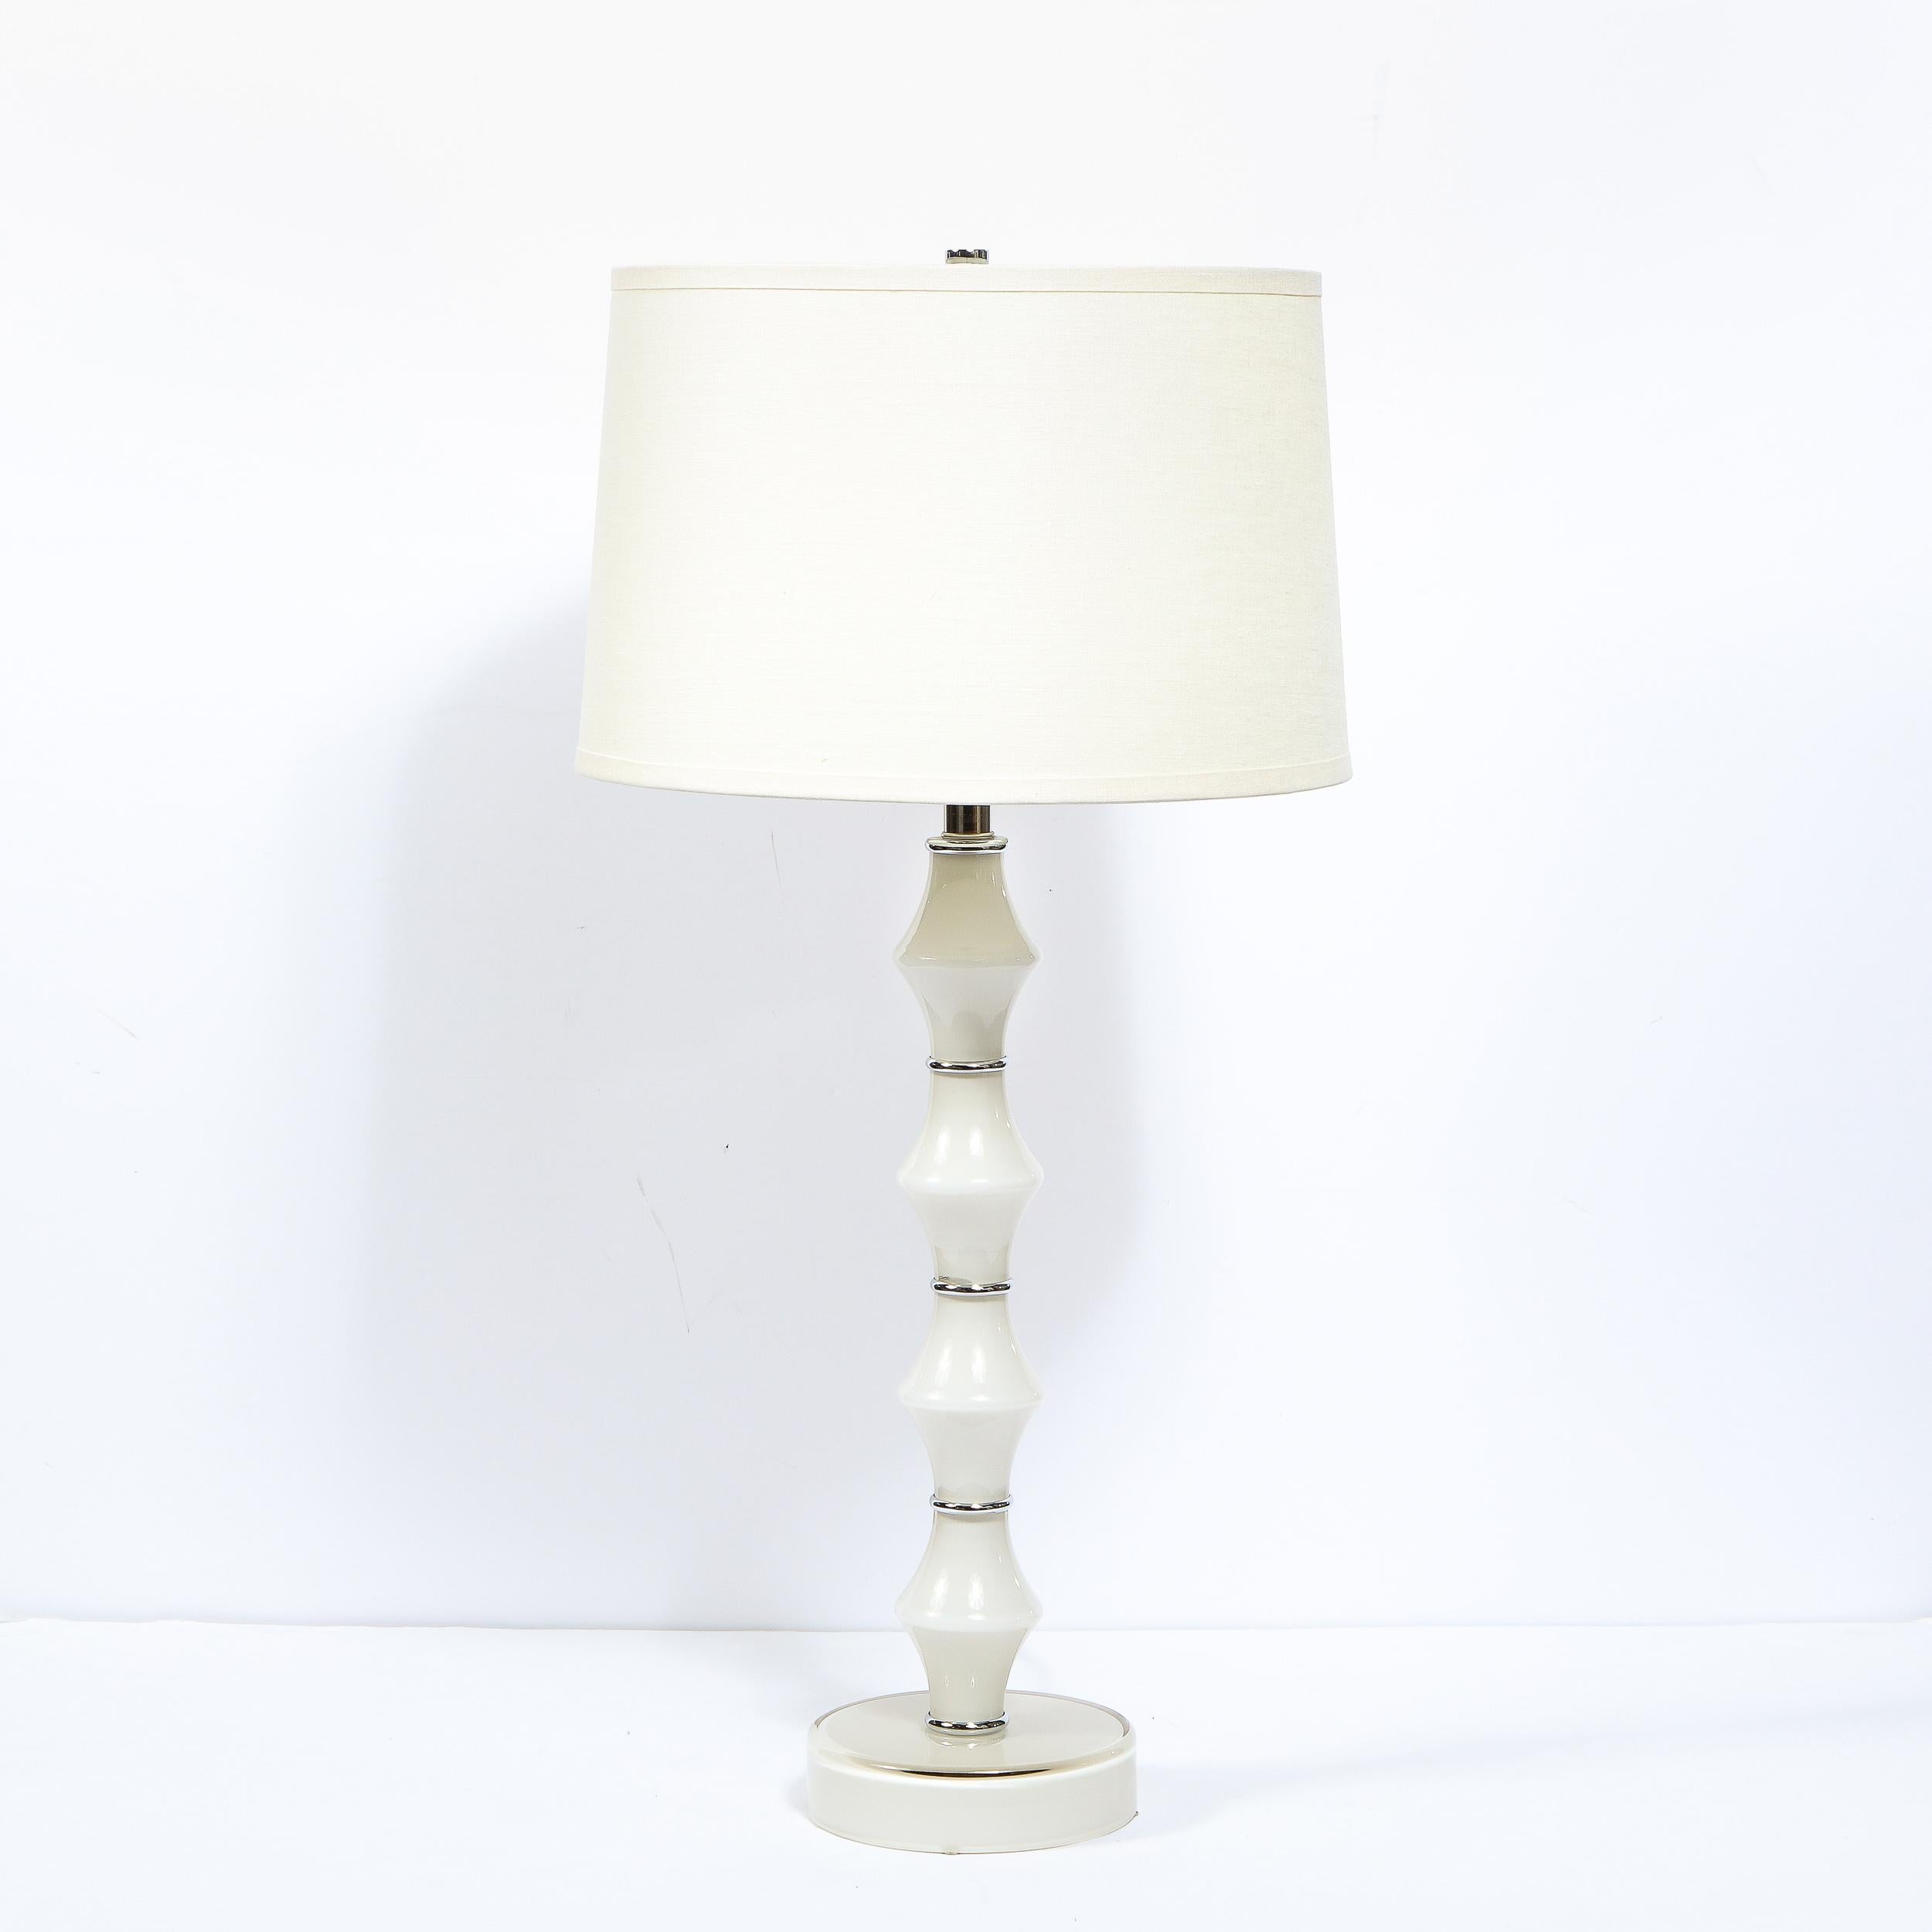 This elegant pair of table lamps were hand blown in Murano, Italy- the island off the coast of Venice renowned for centuries for its superlative glass production. They feature sculptural bodies consisting of four concavely curved pearl white glass